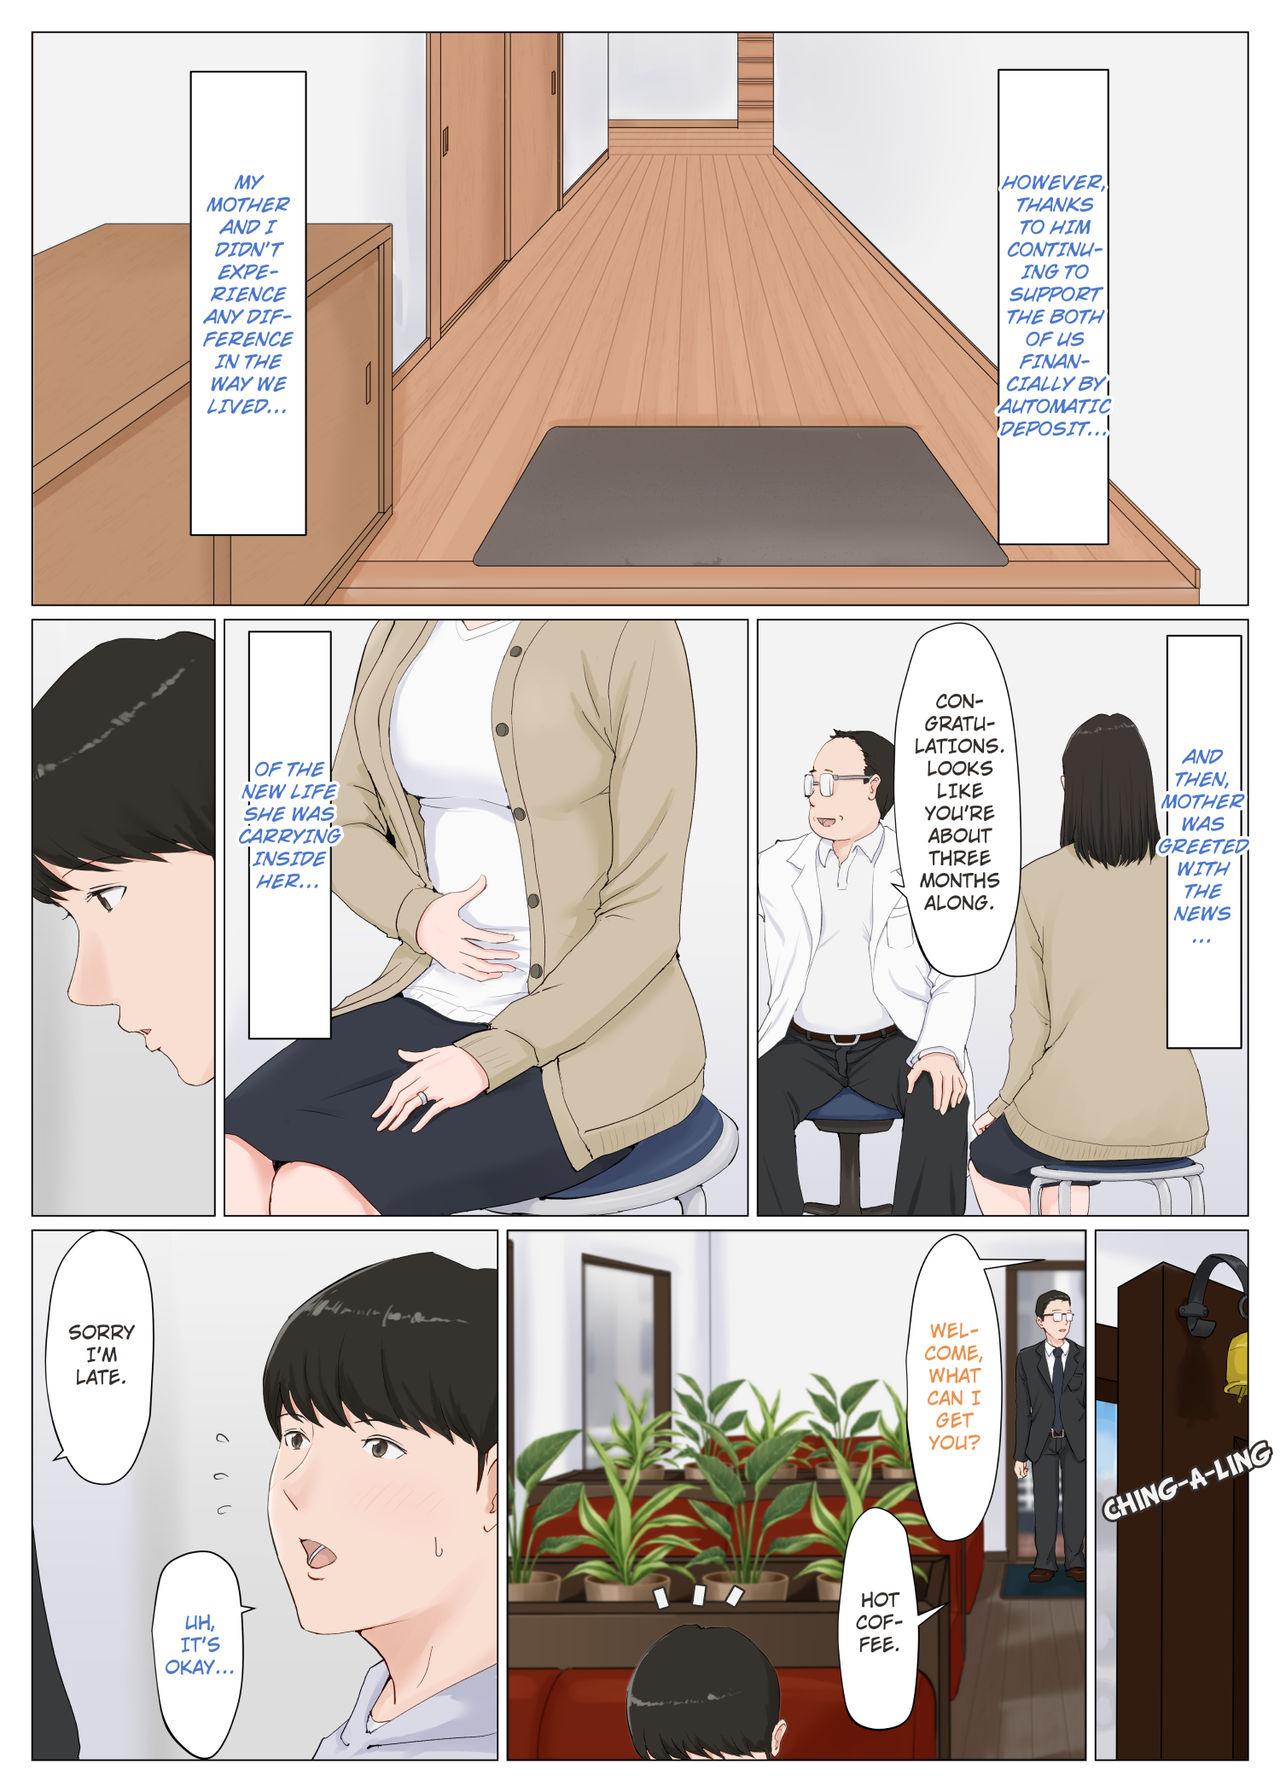 Celebrity Sex Scene Kaa-san Janakya Dame Nanda!! 6 Conclusion | Mother and No Other!! 6 Conclusion - Original Culos - Page 4